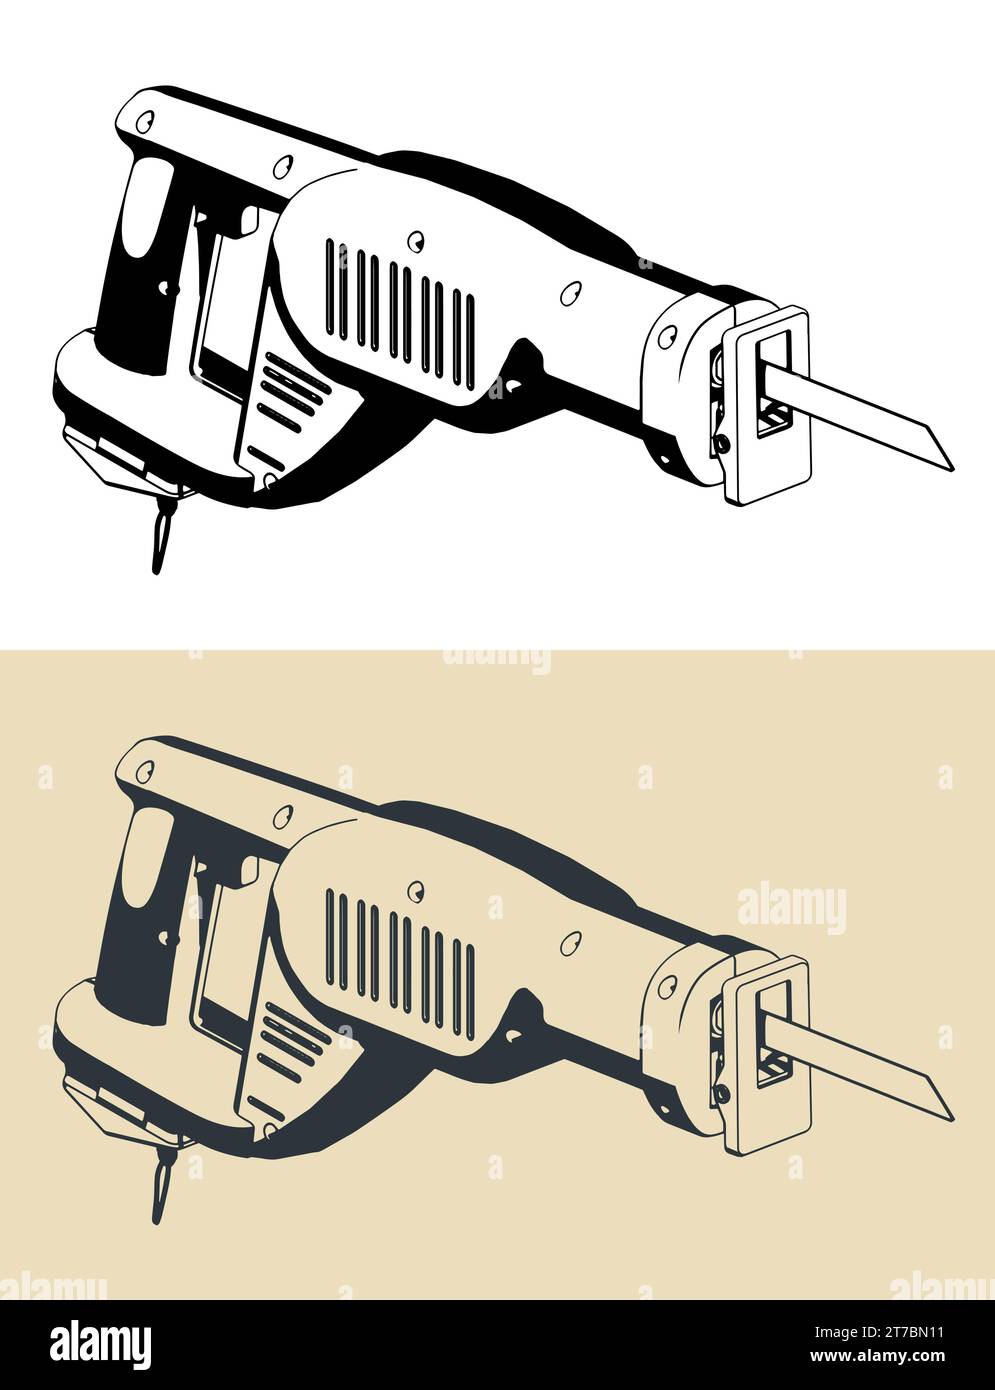 Stylized vector illustrations of reciprocating saw Stock Vector